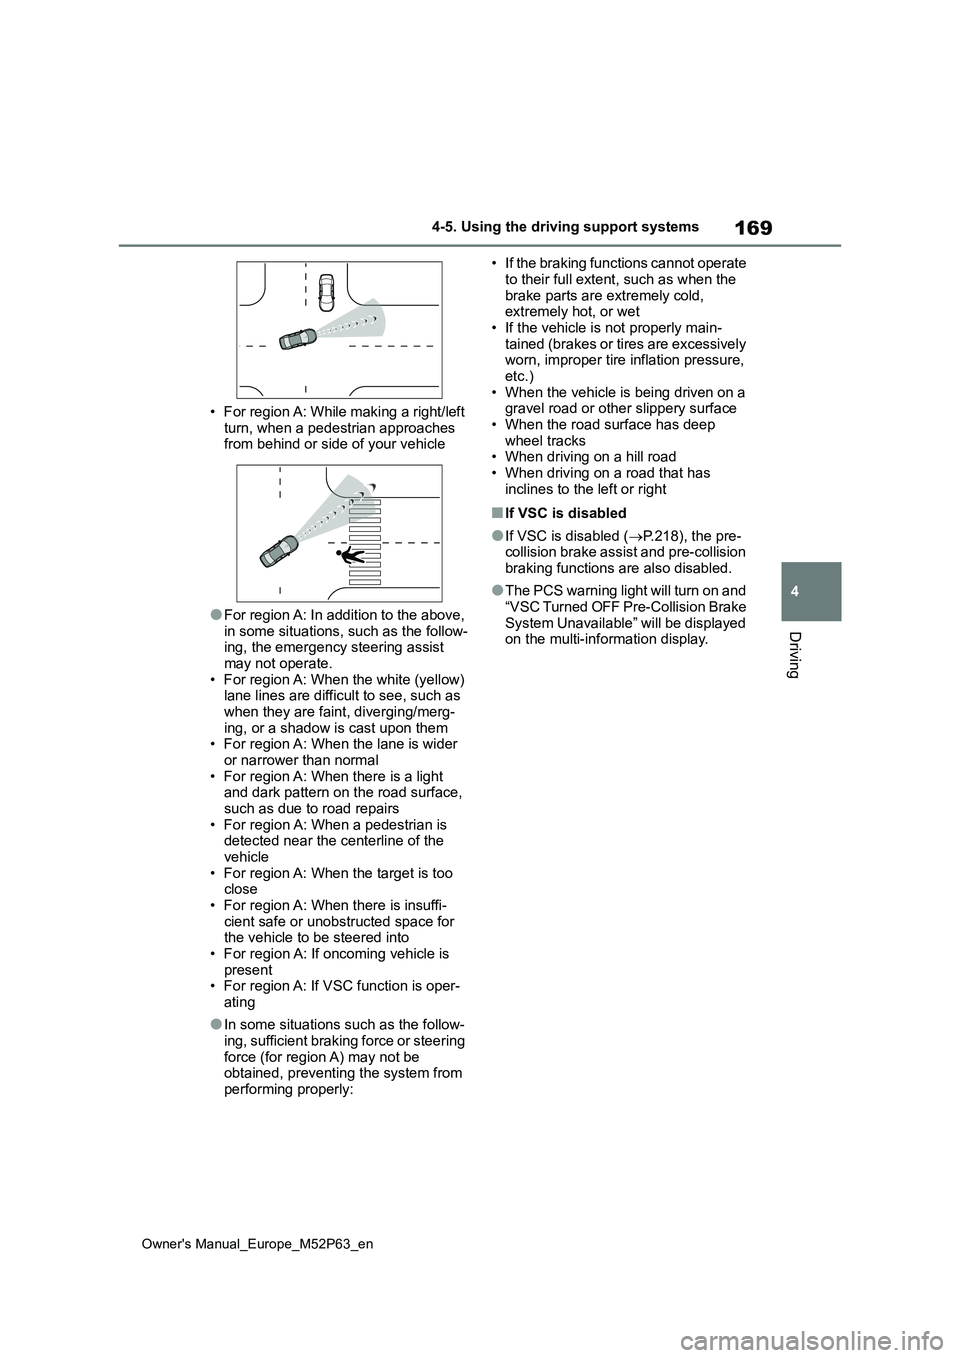 TOYOTA GR YARIS 2023  Owners Manual 169
4
Owner's Manual_Europe_M52P63_en
4-5. Using the driving support systems
Driving
• For region A: While making a right/left  
turn, when a pedestrian approaches  from behind or side of your v